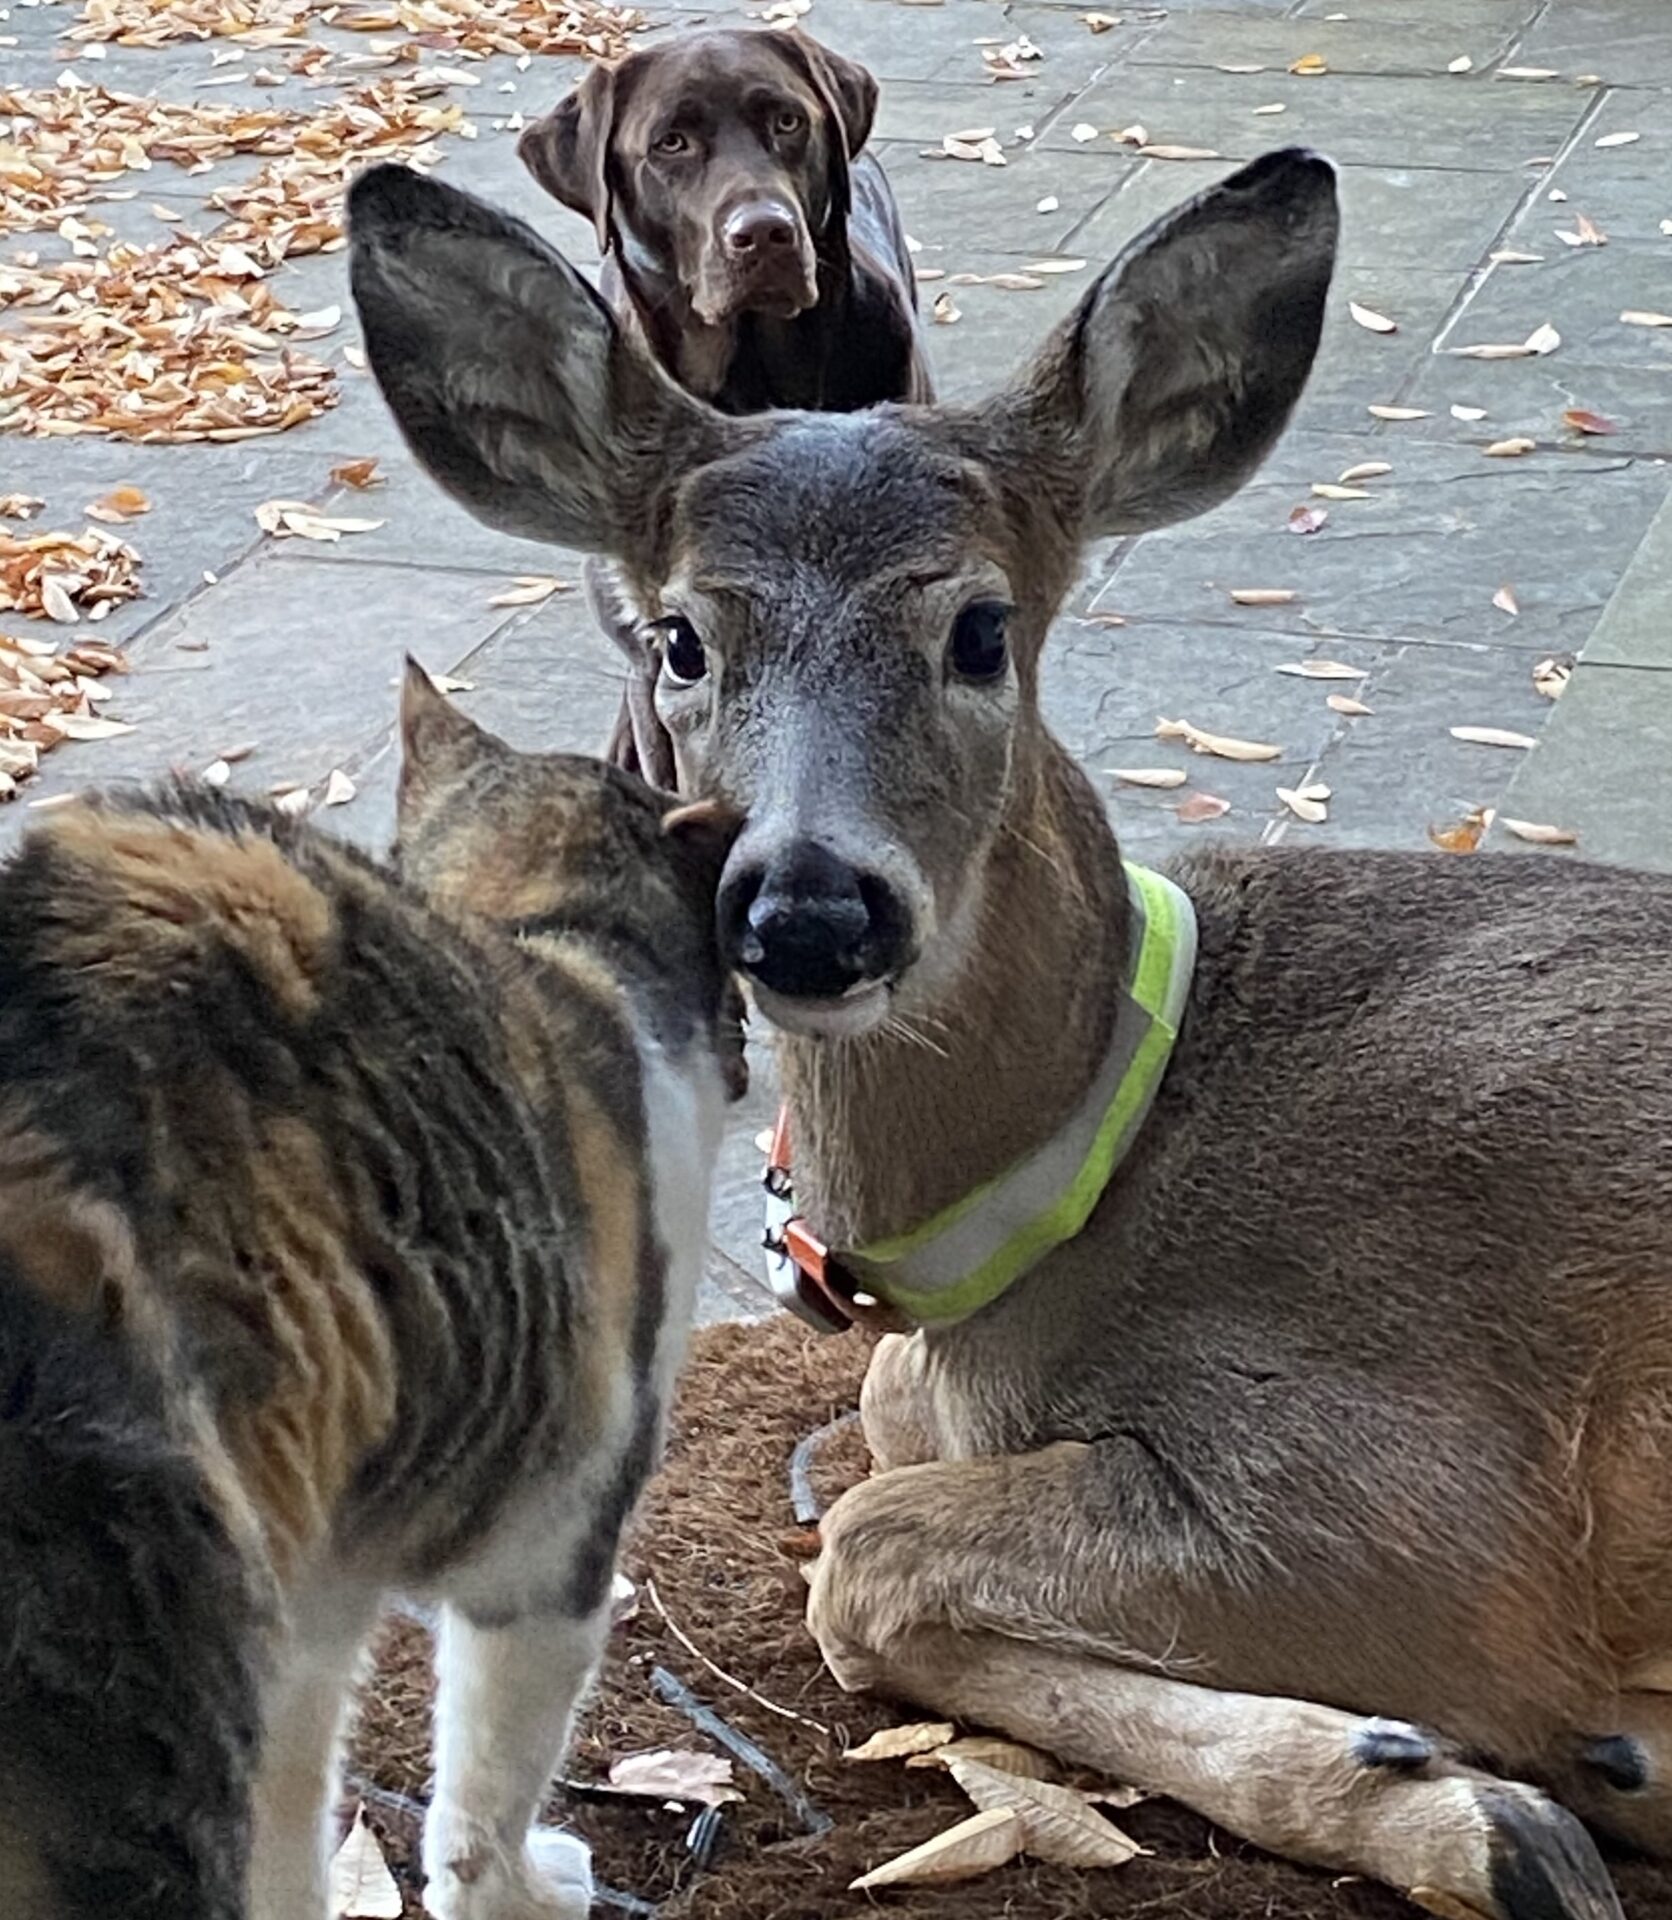 A deer resting, a cat and dog near it